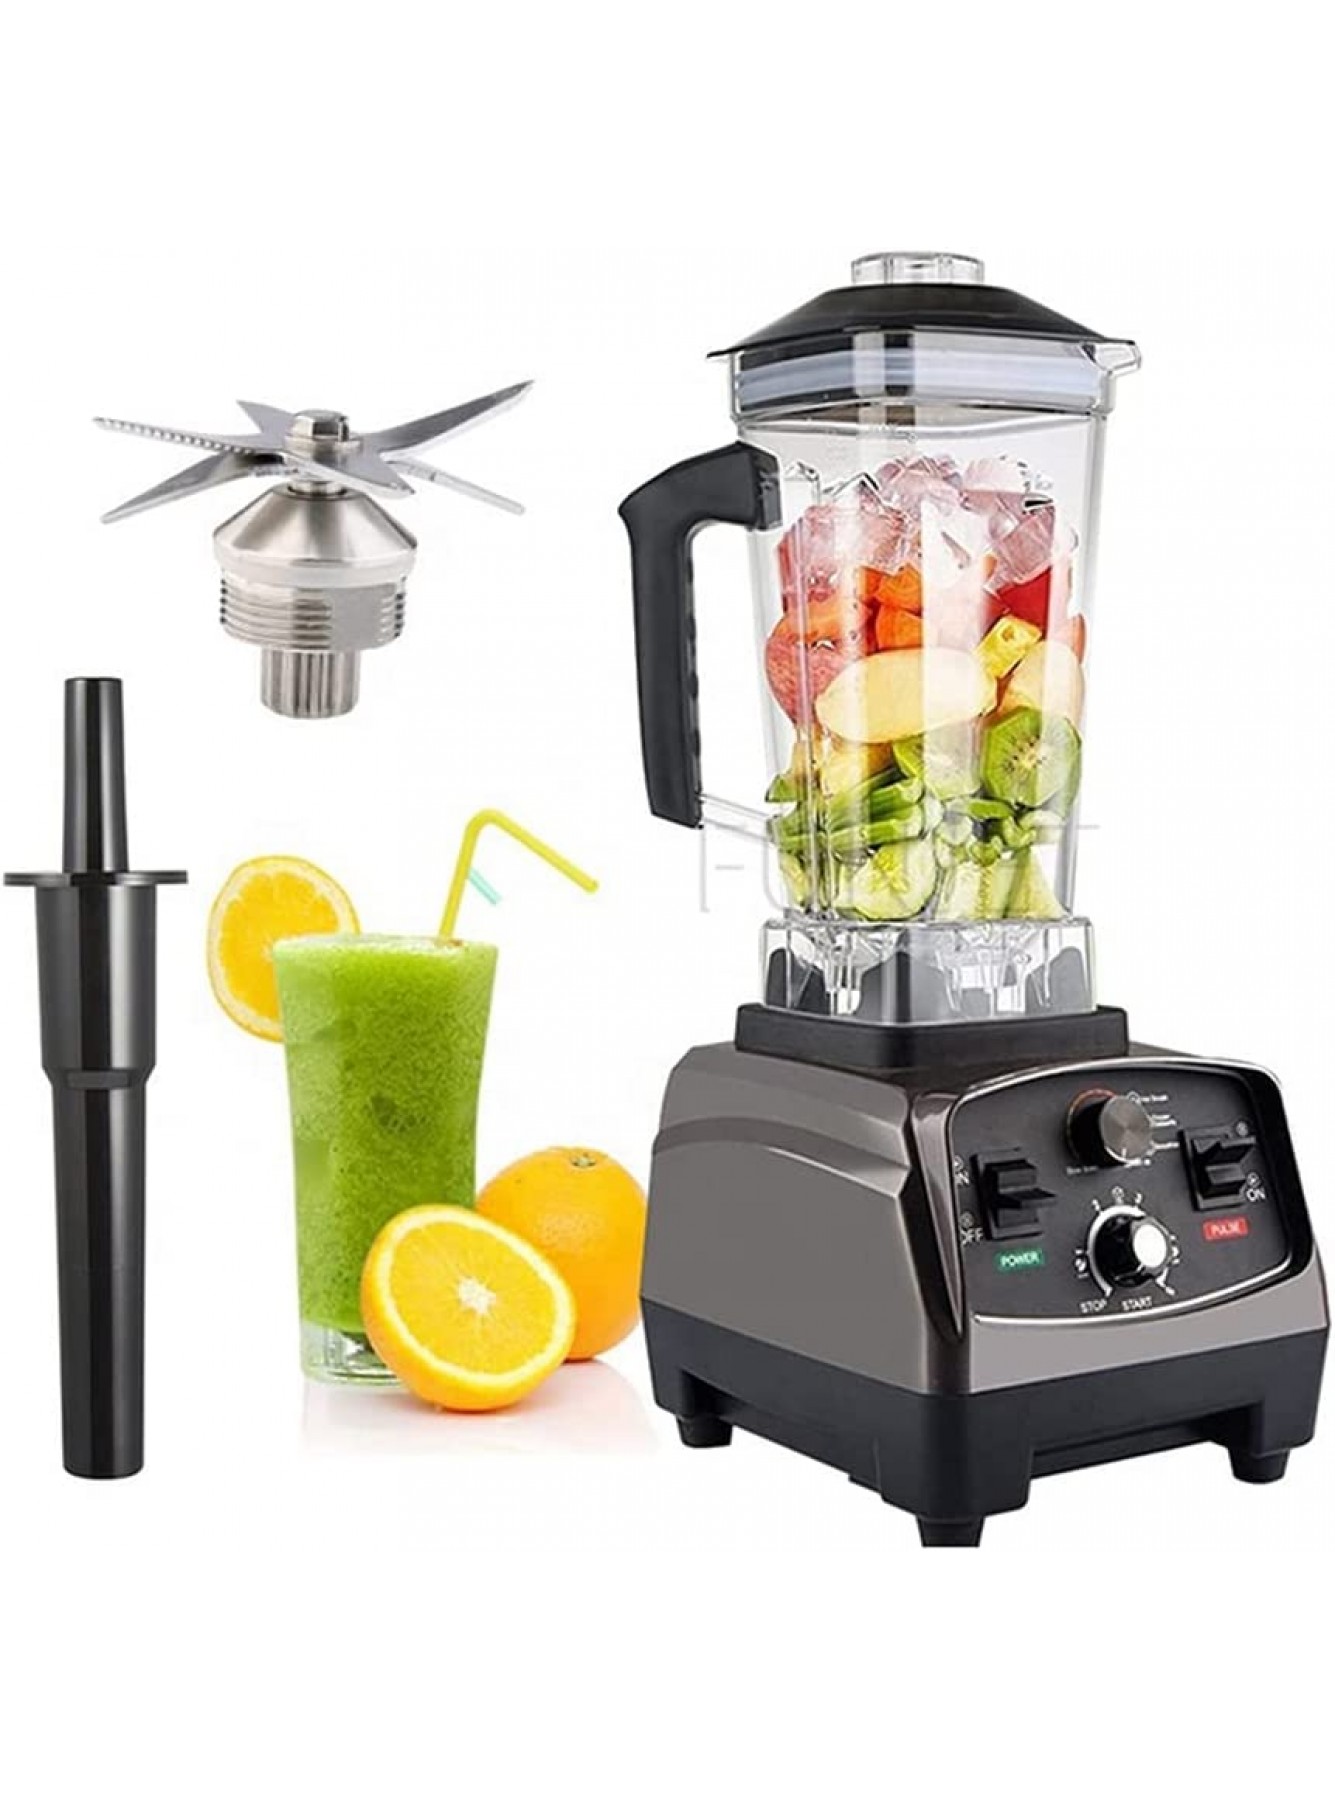 Helikim 2200W High Speed Countertop Blender 2L Mixer with 6 Stainless Steel Blades and Timing Control for Smoothies Fruit Juices Ice Crush Shakes B098TG2PY5